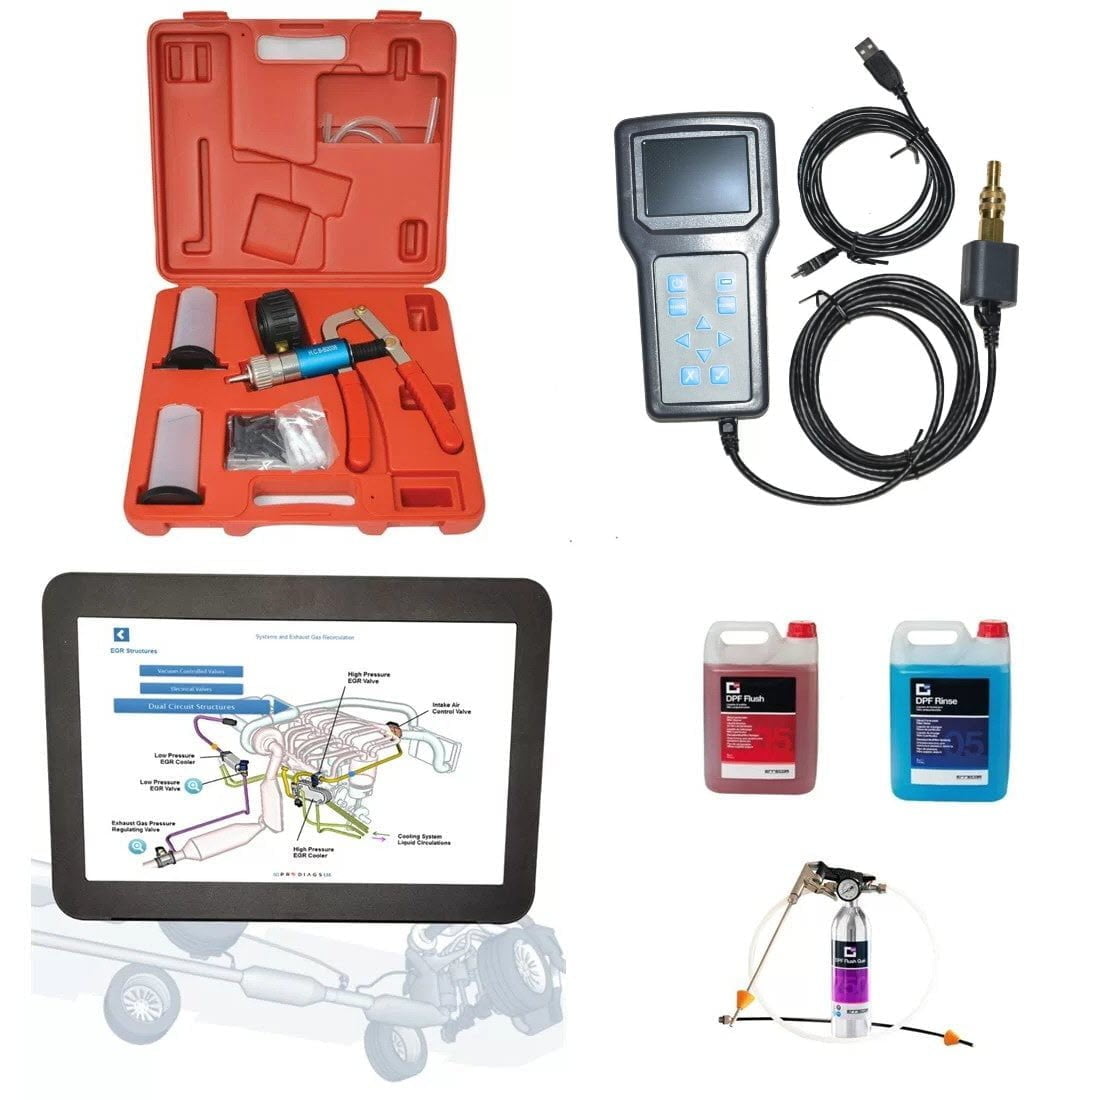 i-Turbo 3 Training] F-Diesel i‐Turbo 3 Intelligent Turbo Actuator Tester  and Programmer basic introduce (1) - F-DIESEL Common Rail Injection System  Components,Engine Parts and Automotive Electronics Parts Mall